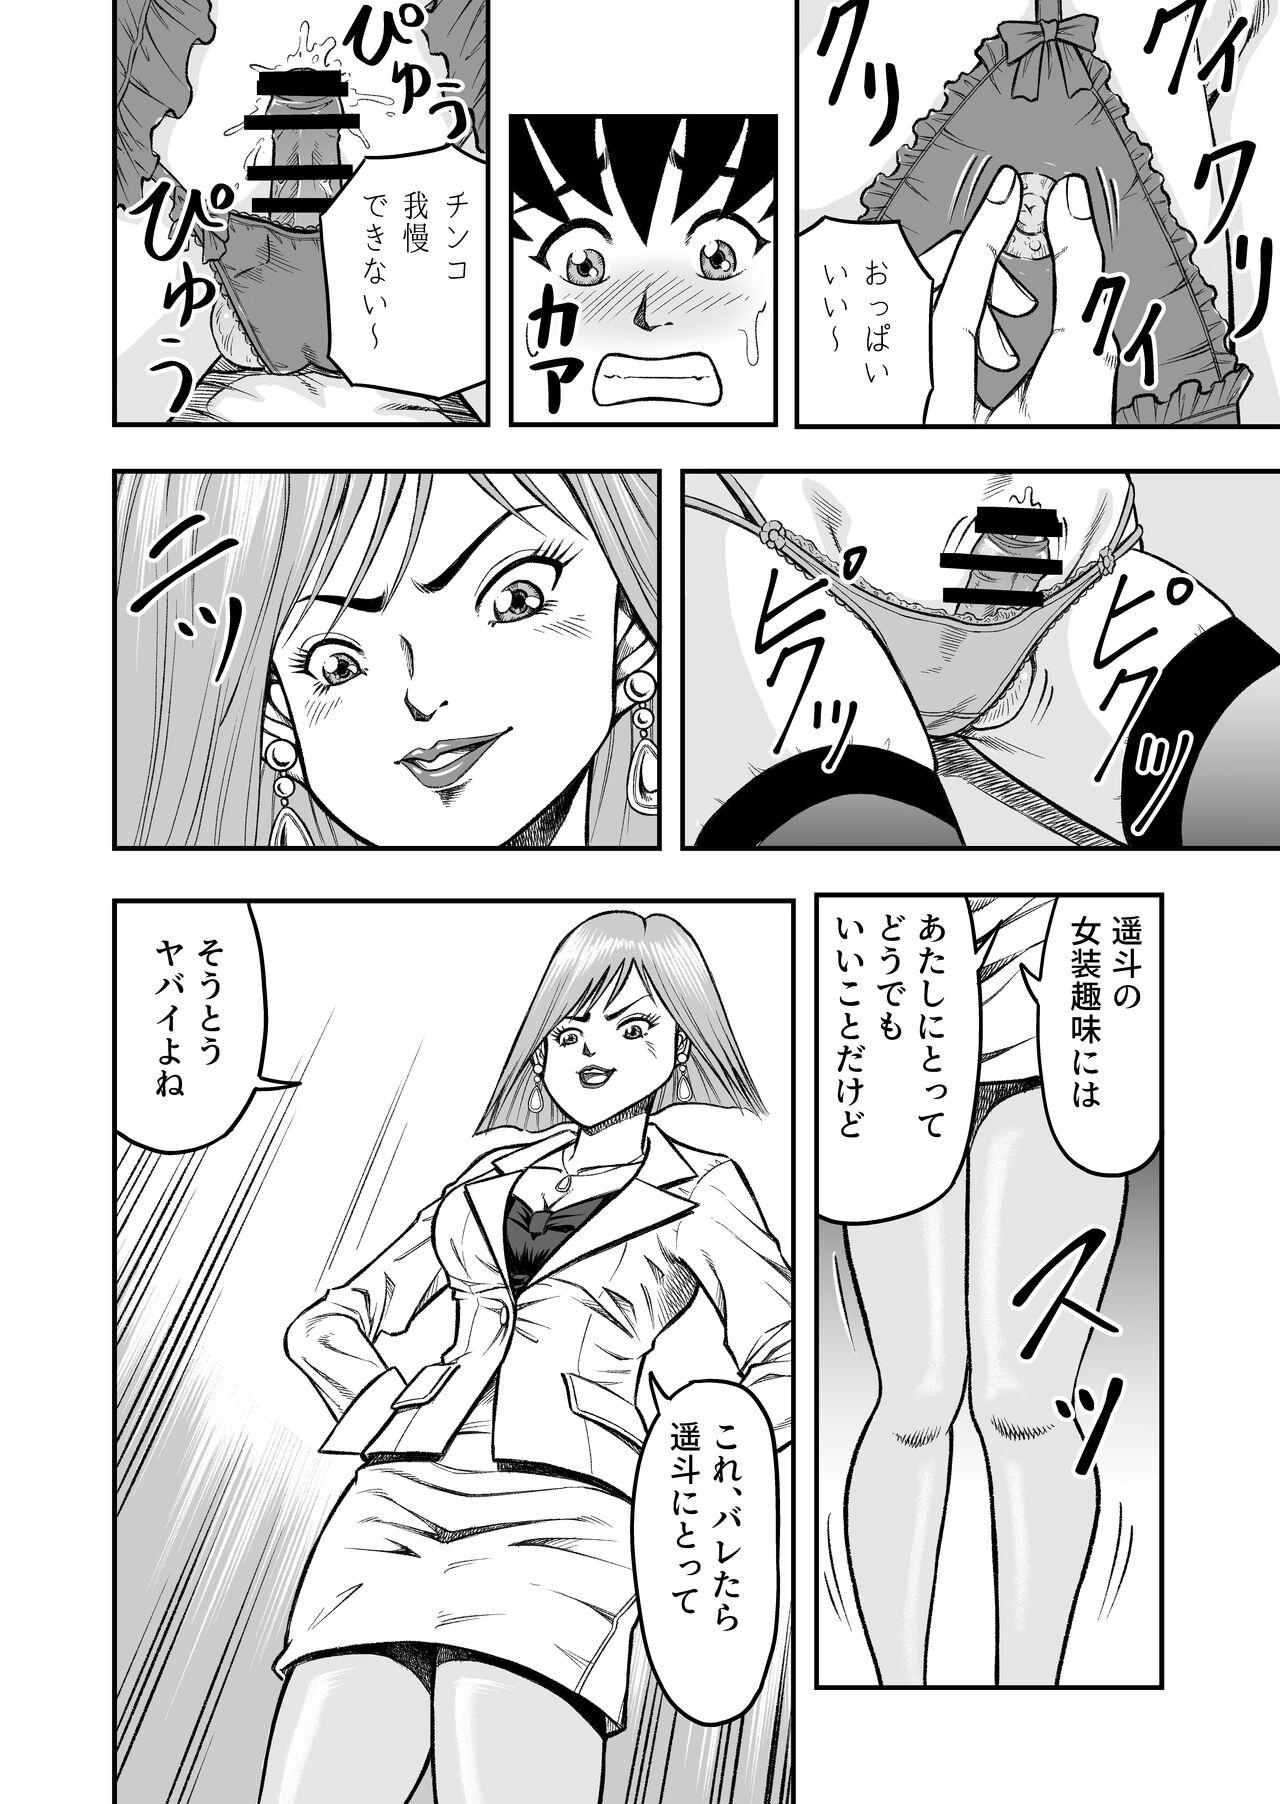 Jacking Off OwnWillボクがアタシになったとき 総集編 - Original Asses - Page 10